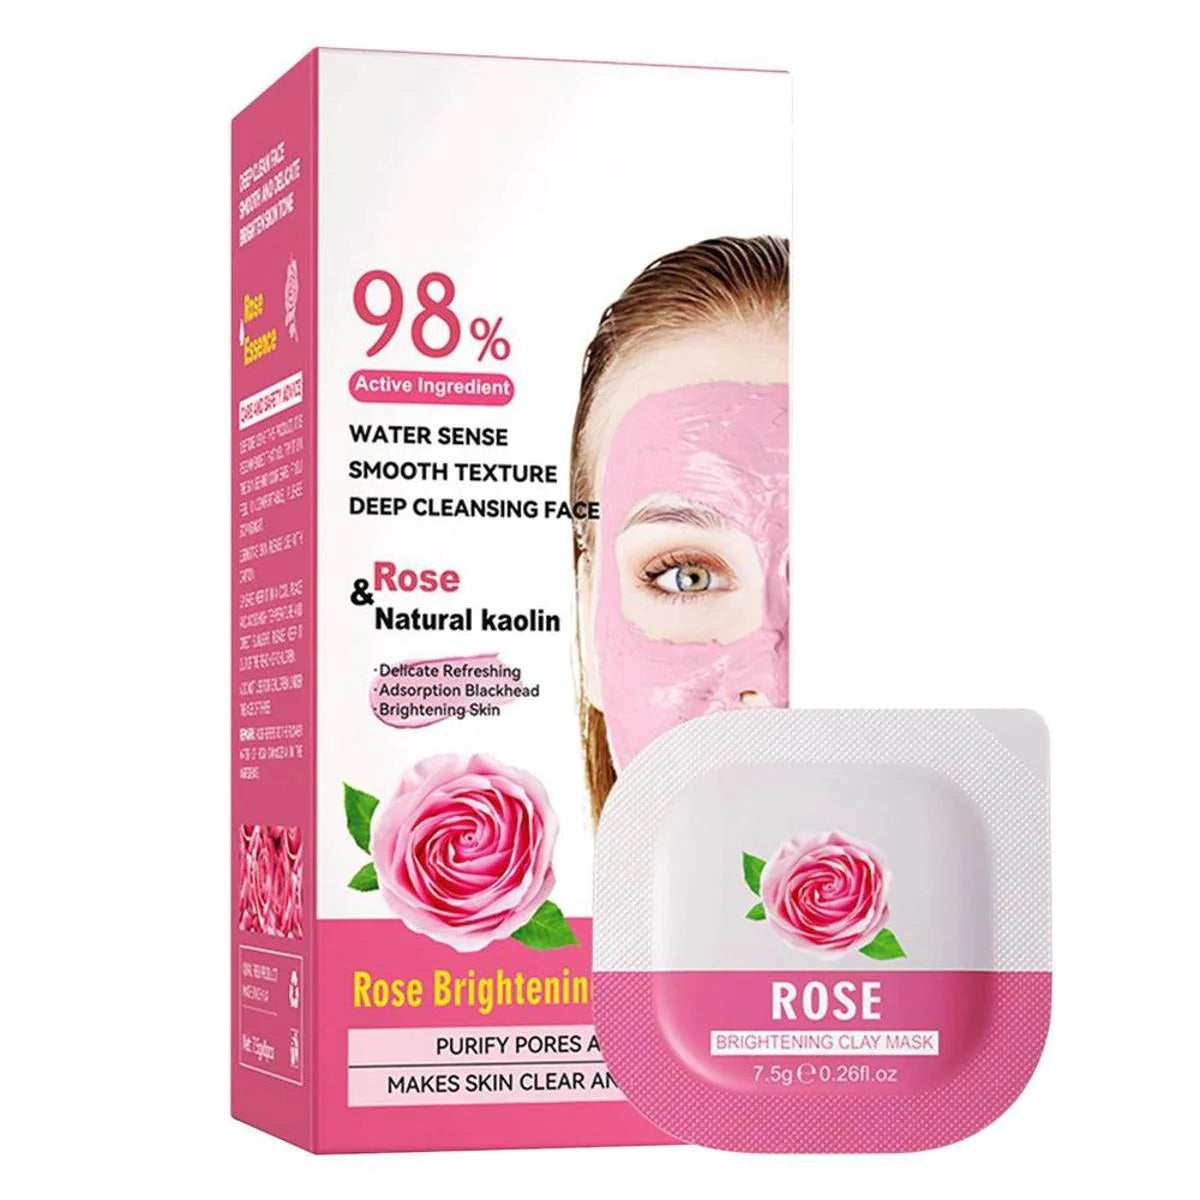 SADOER Rose deep cleansing Clay Mask 7.5g 8 pices